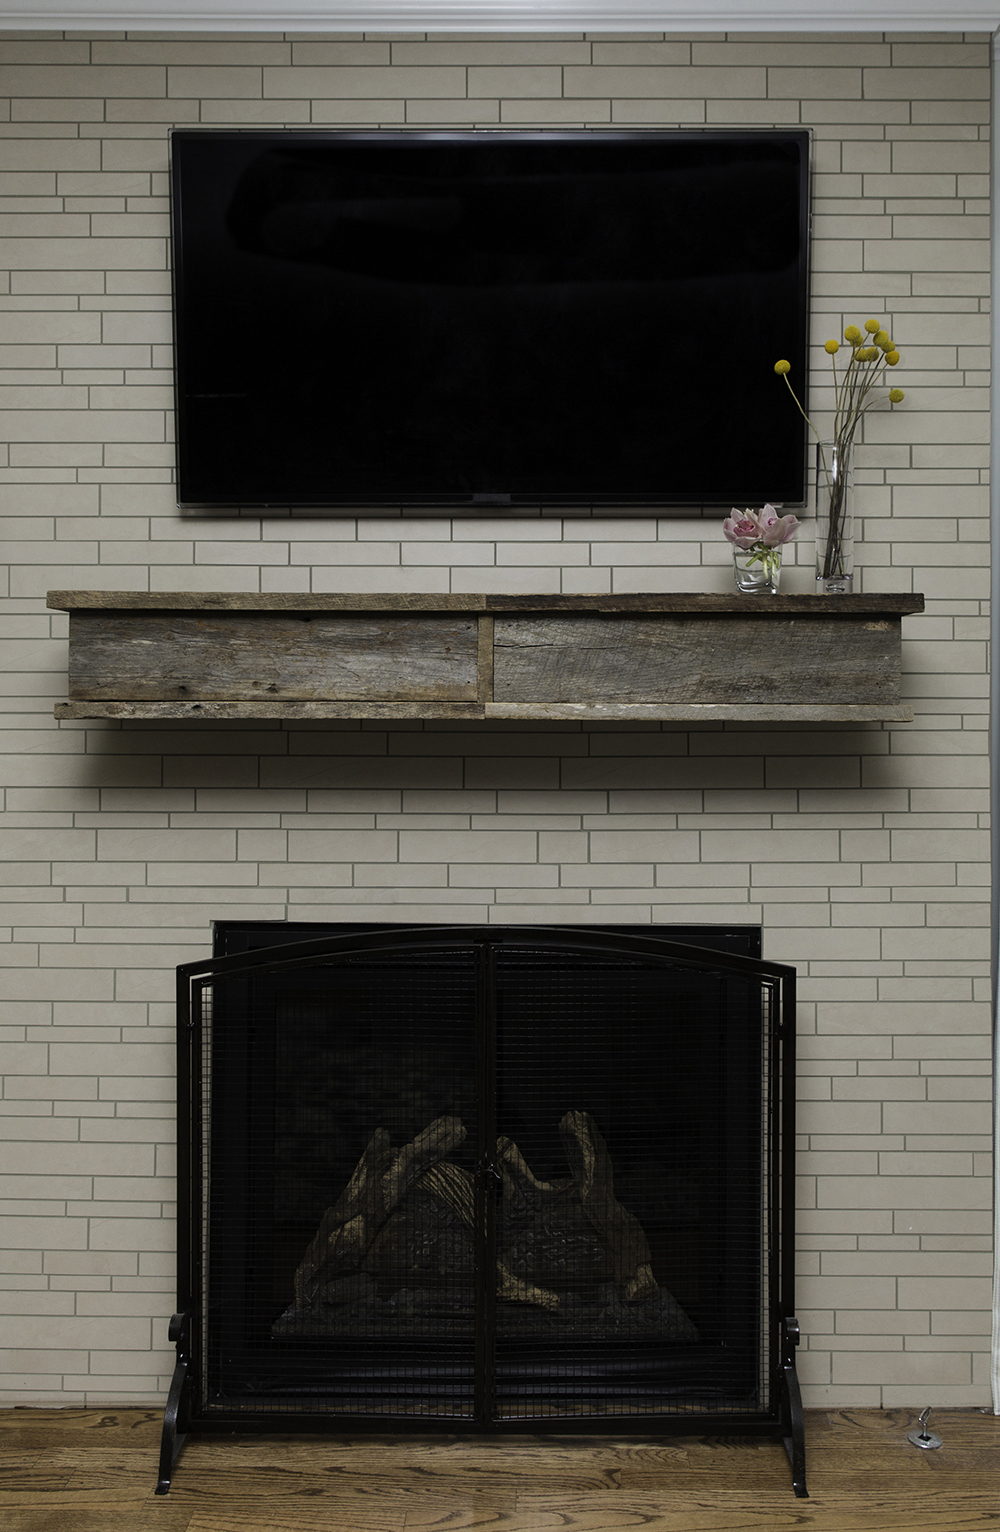 The focal point of the living room is the mantel made from reclaimed barn wood, which Maureen’s husband salvaged after church one day and put aside for a future project.